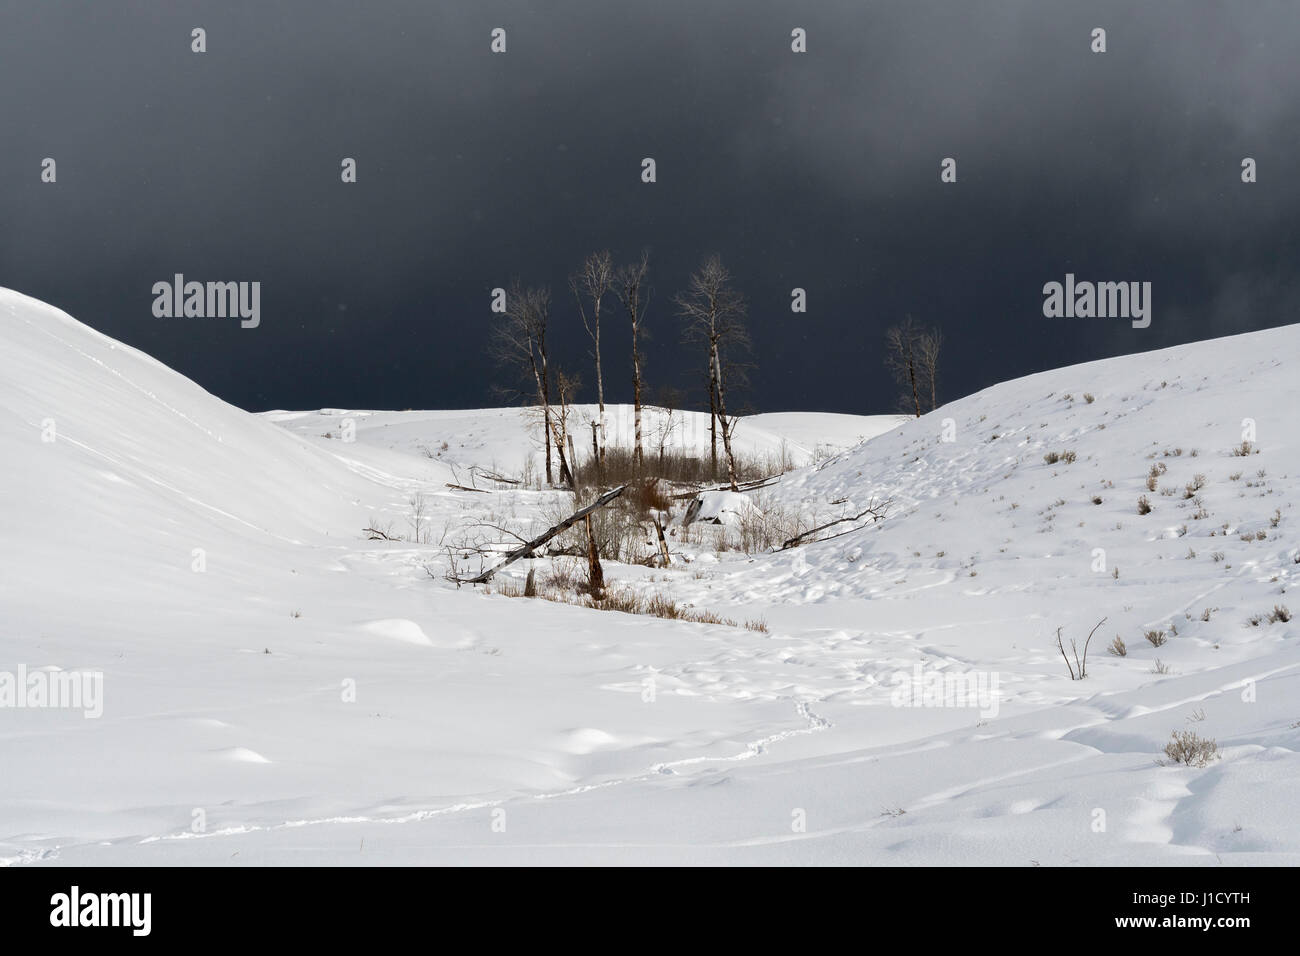 Yellowstone National Park, Lamar Valley, during a blizzard, snow storm, dark sky, strong winds blasting snow from the hills, Wyoming, USA. Stock Photo